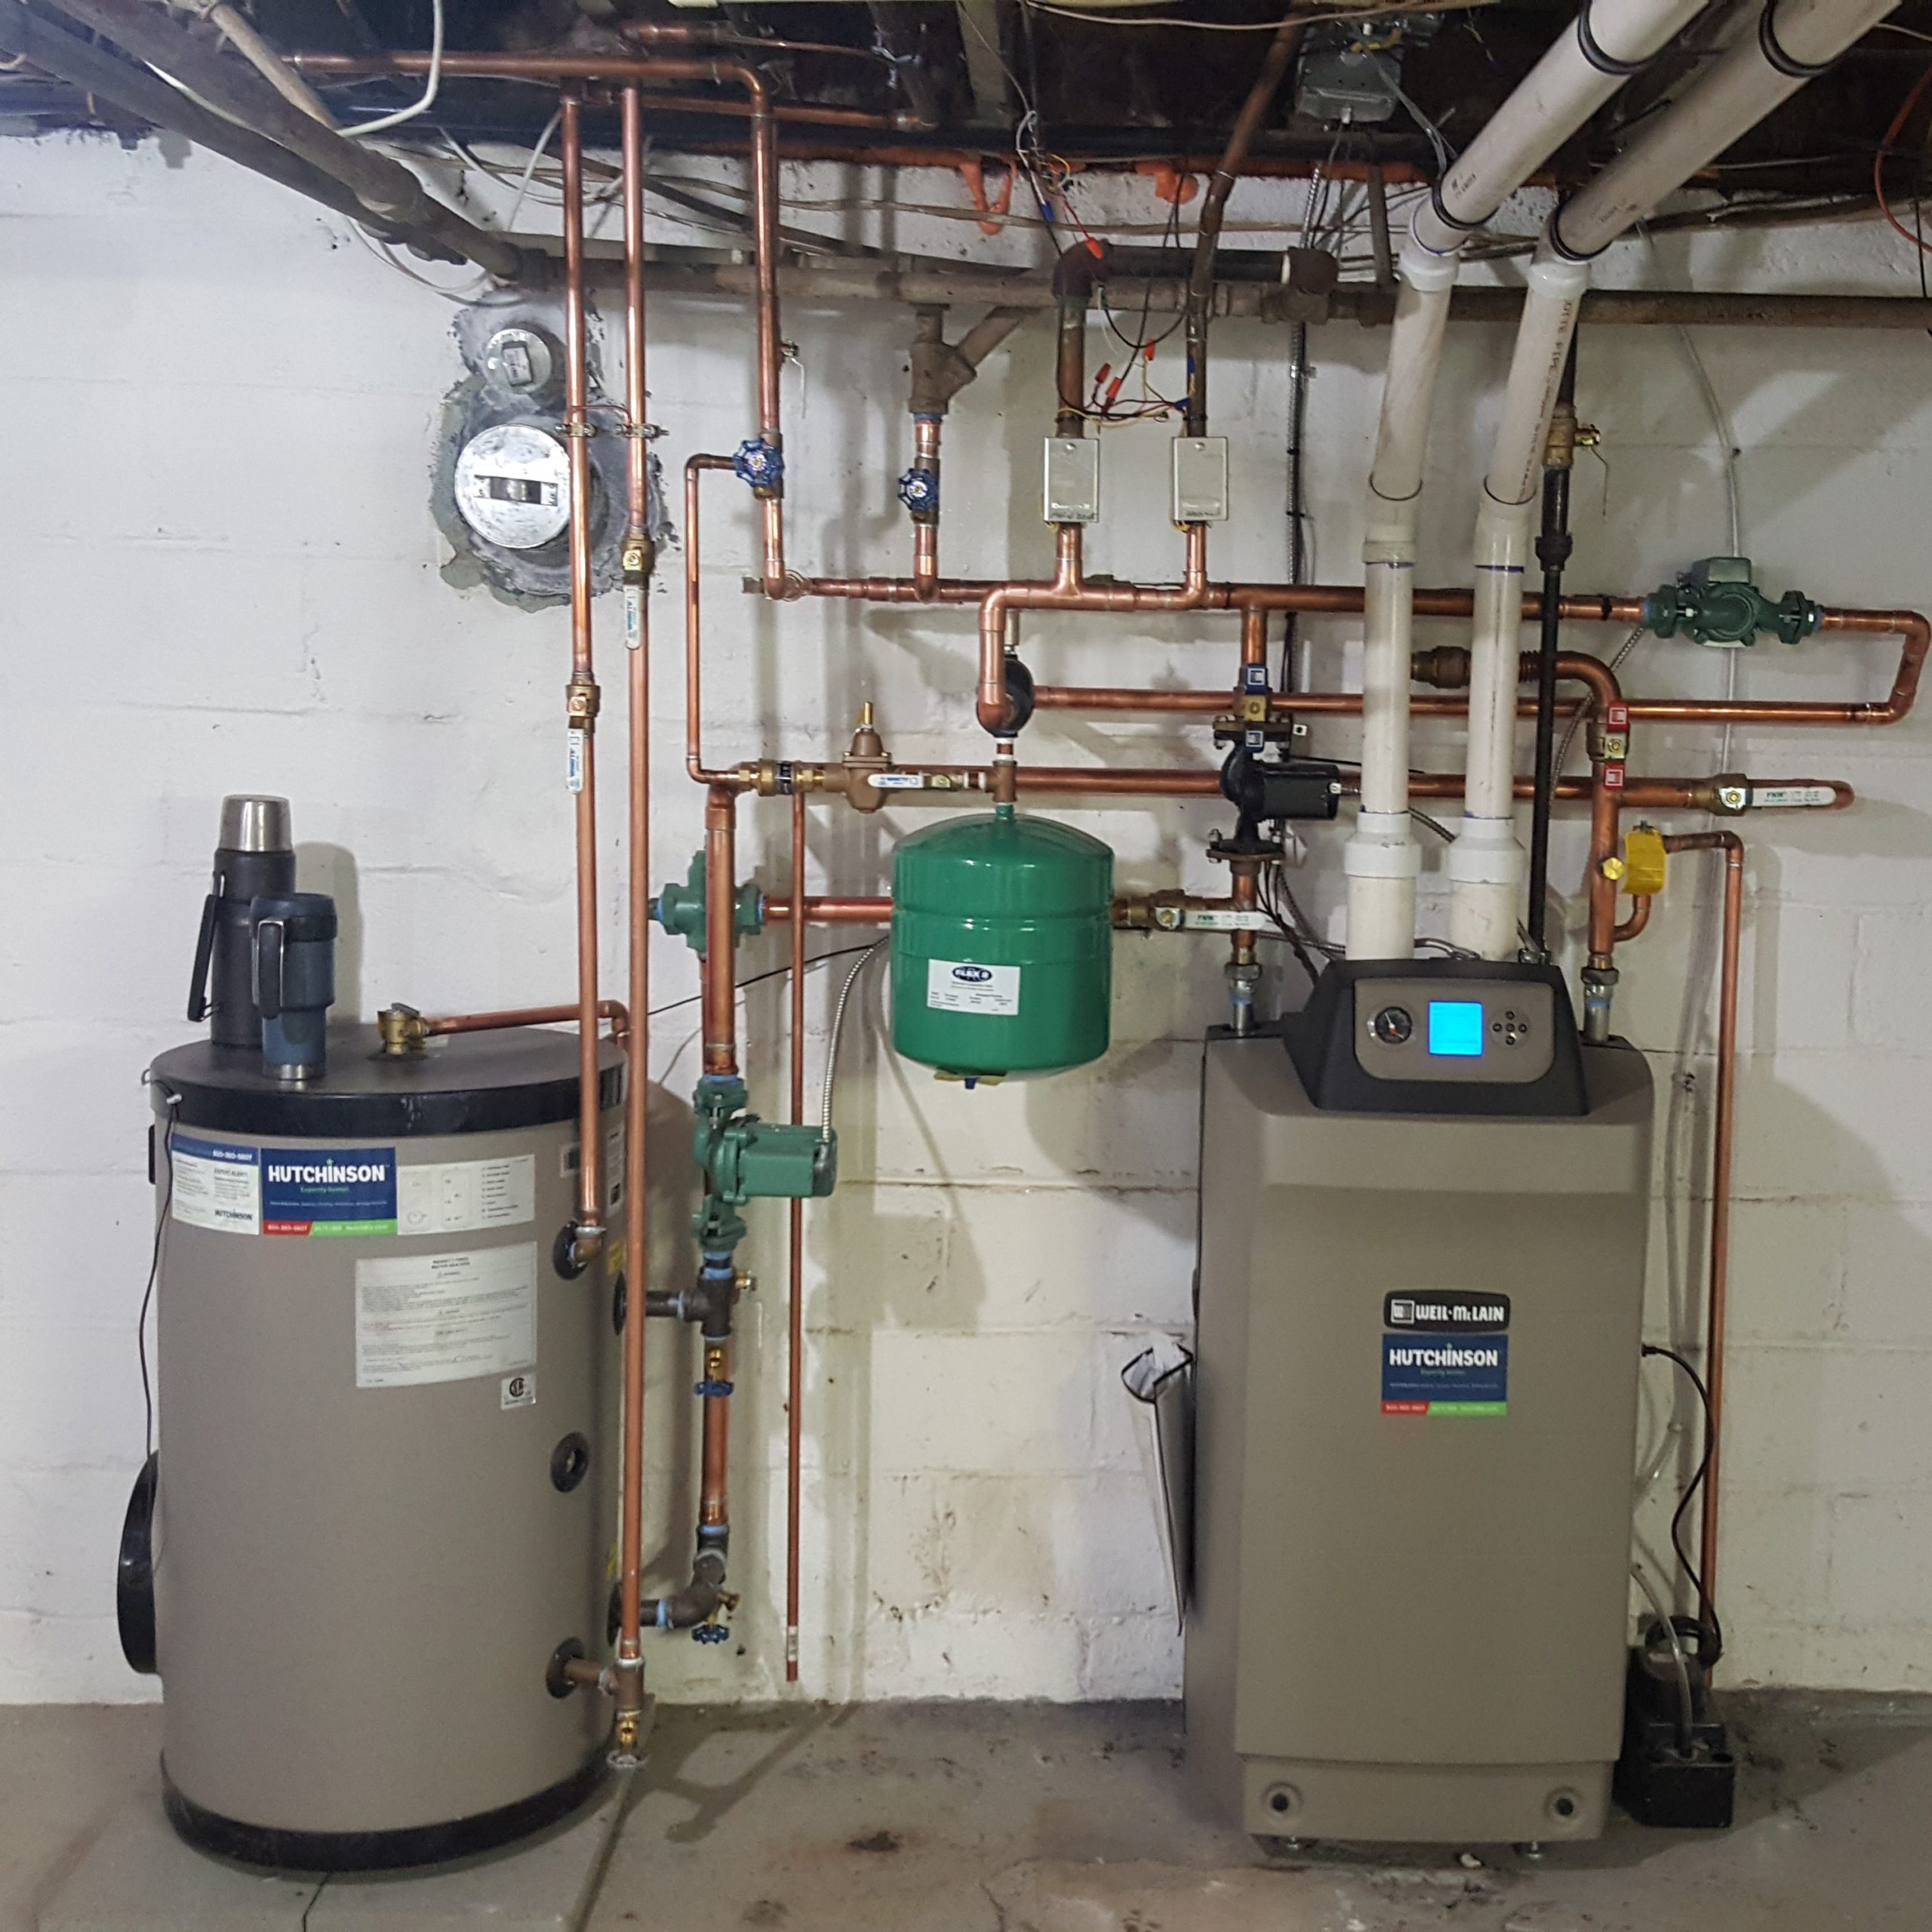 Plumbing, Heating and Air Conditioning Services in Buena, NJ